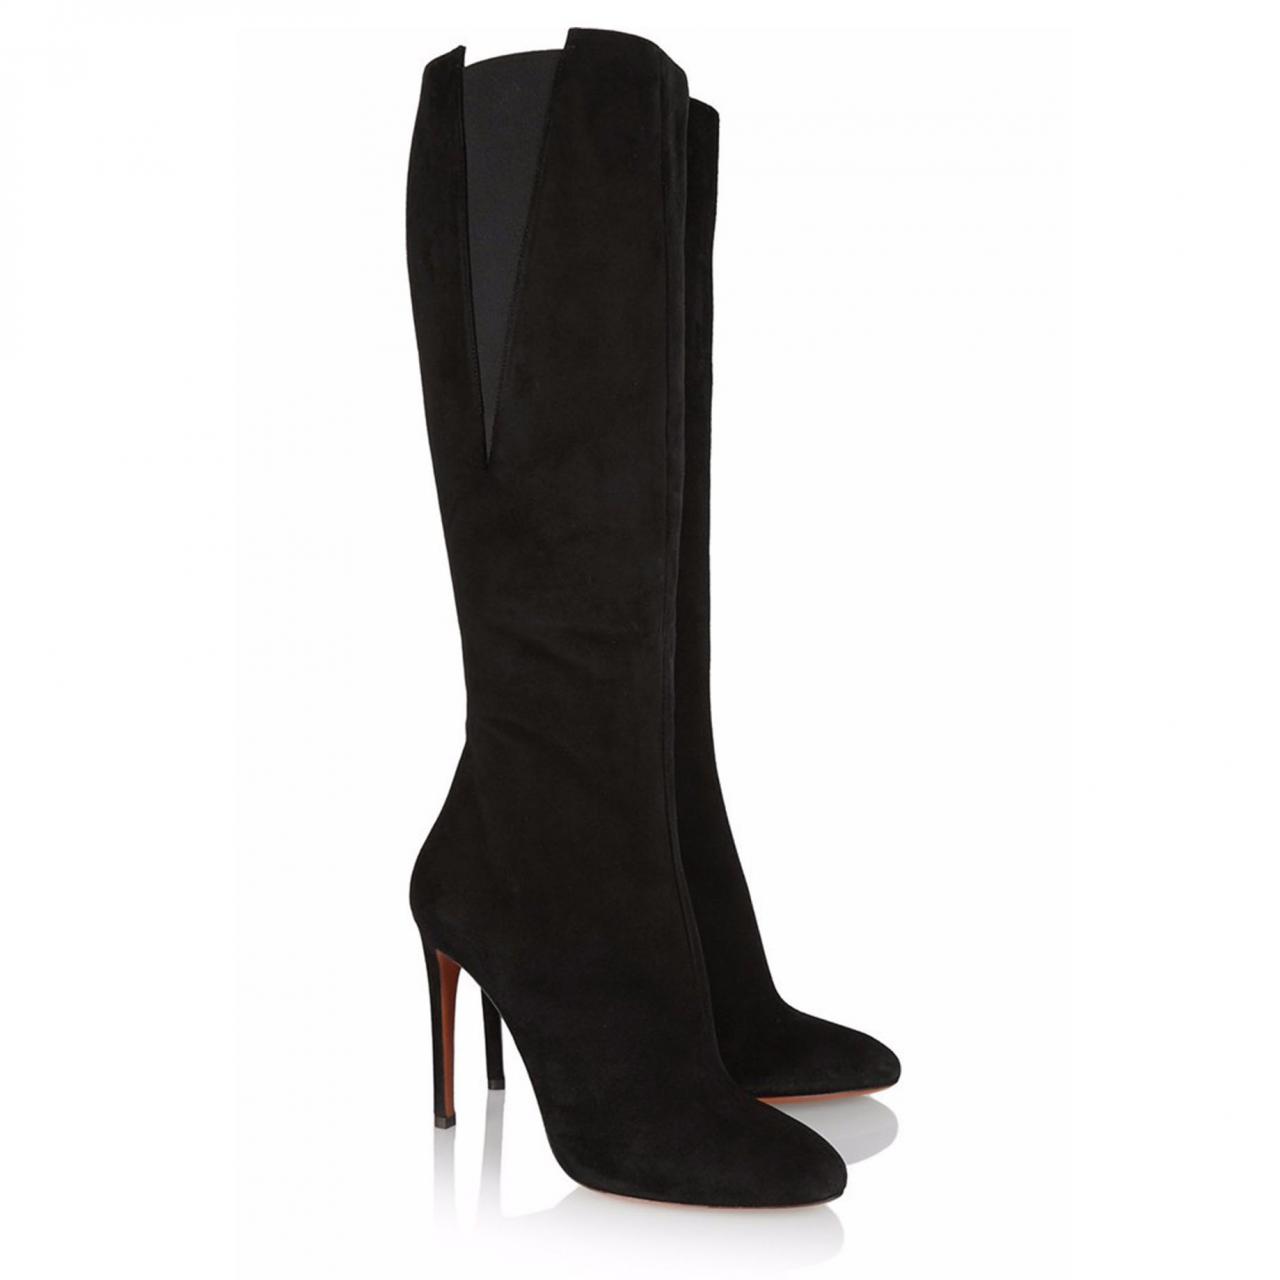 Black Faux Suede Pointed-toe Knee High Stiletto Heel Boots Featuring Side Zipper